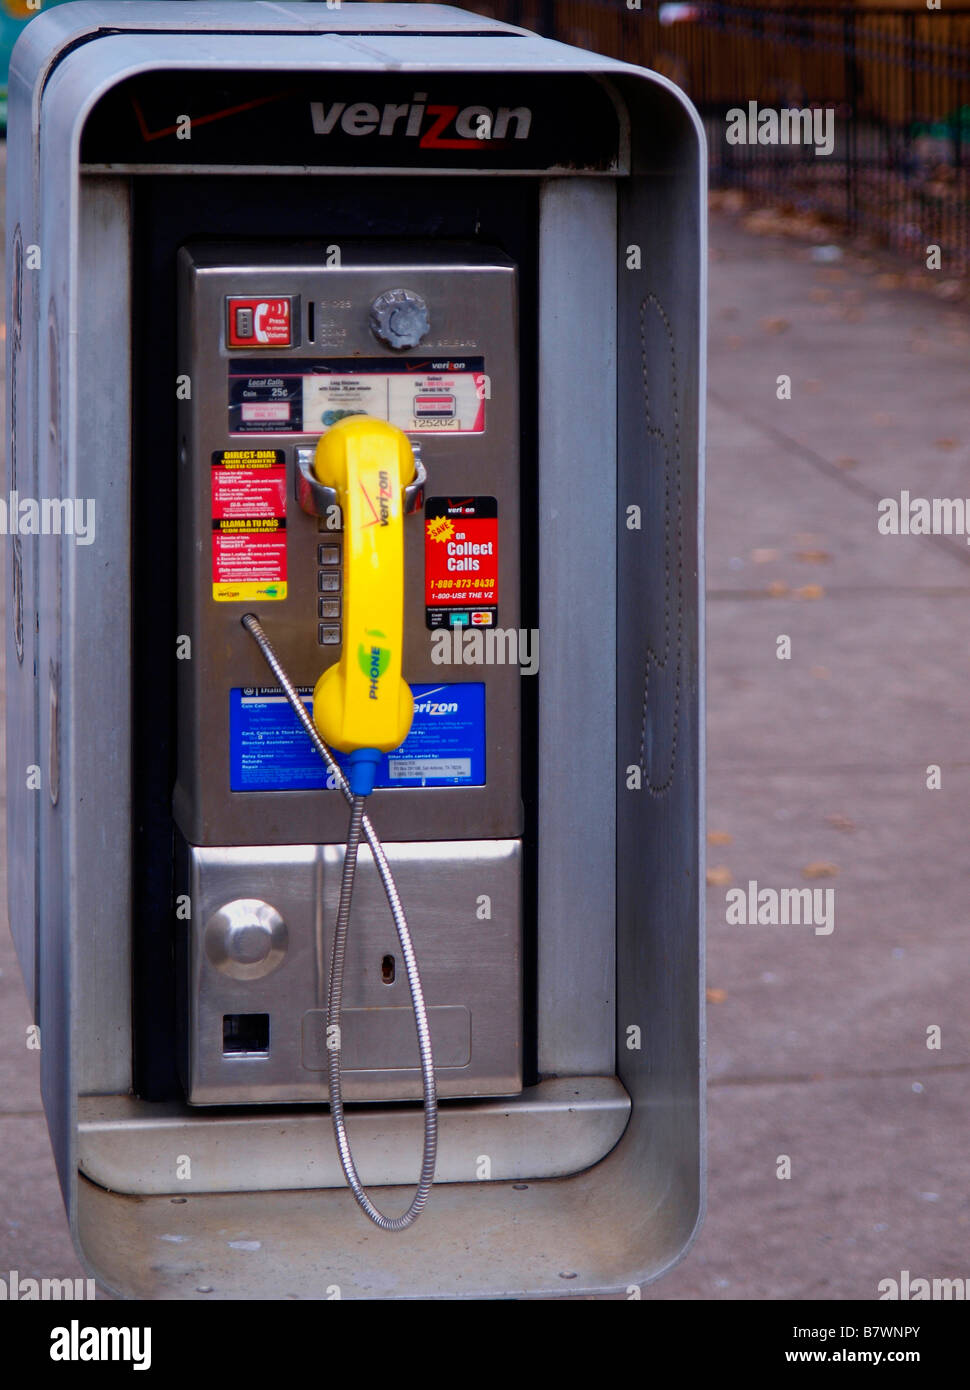 Dirty, colorful pay telephone looking old-fashioned in a modern urban setting. Stock Photo